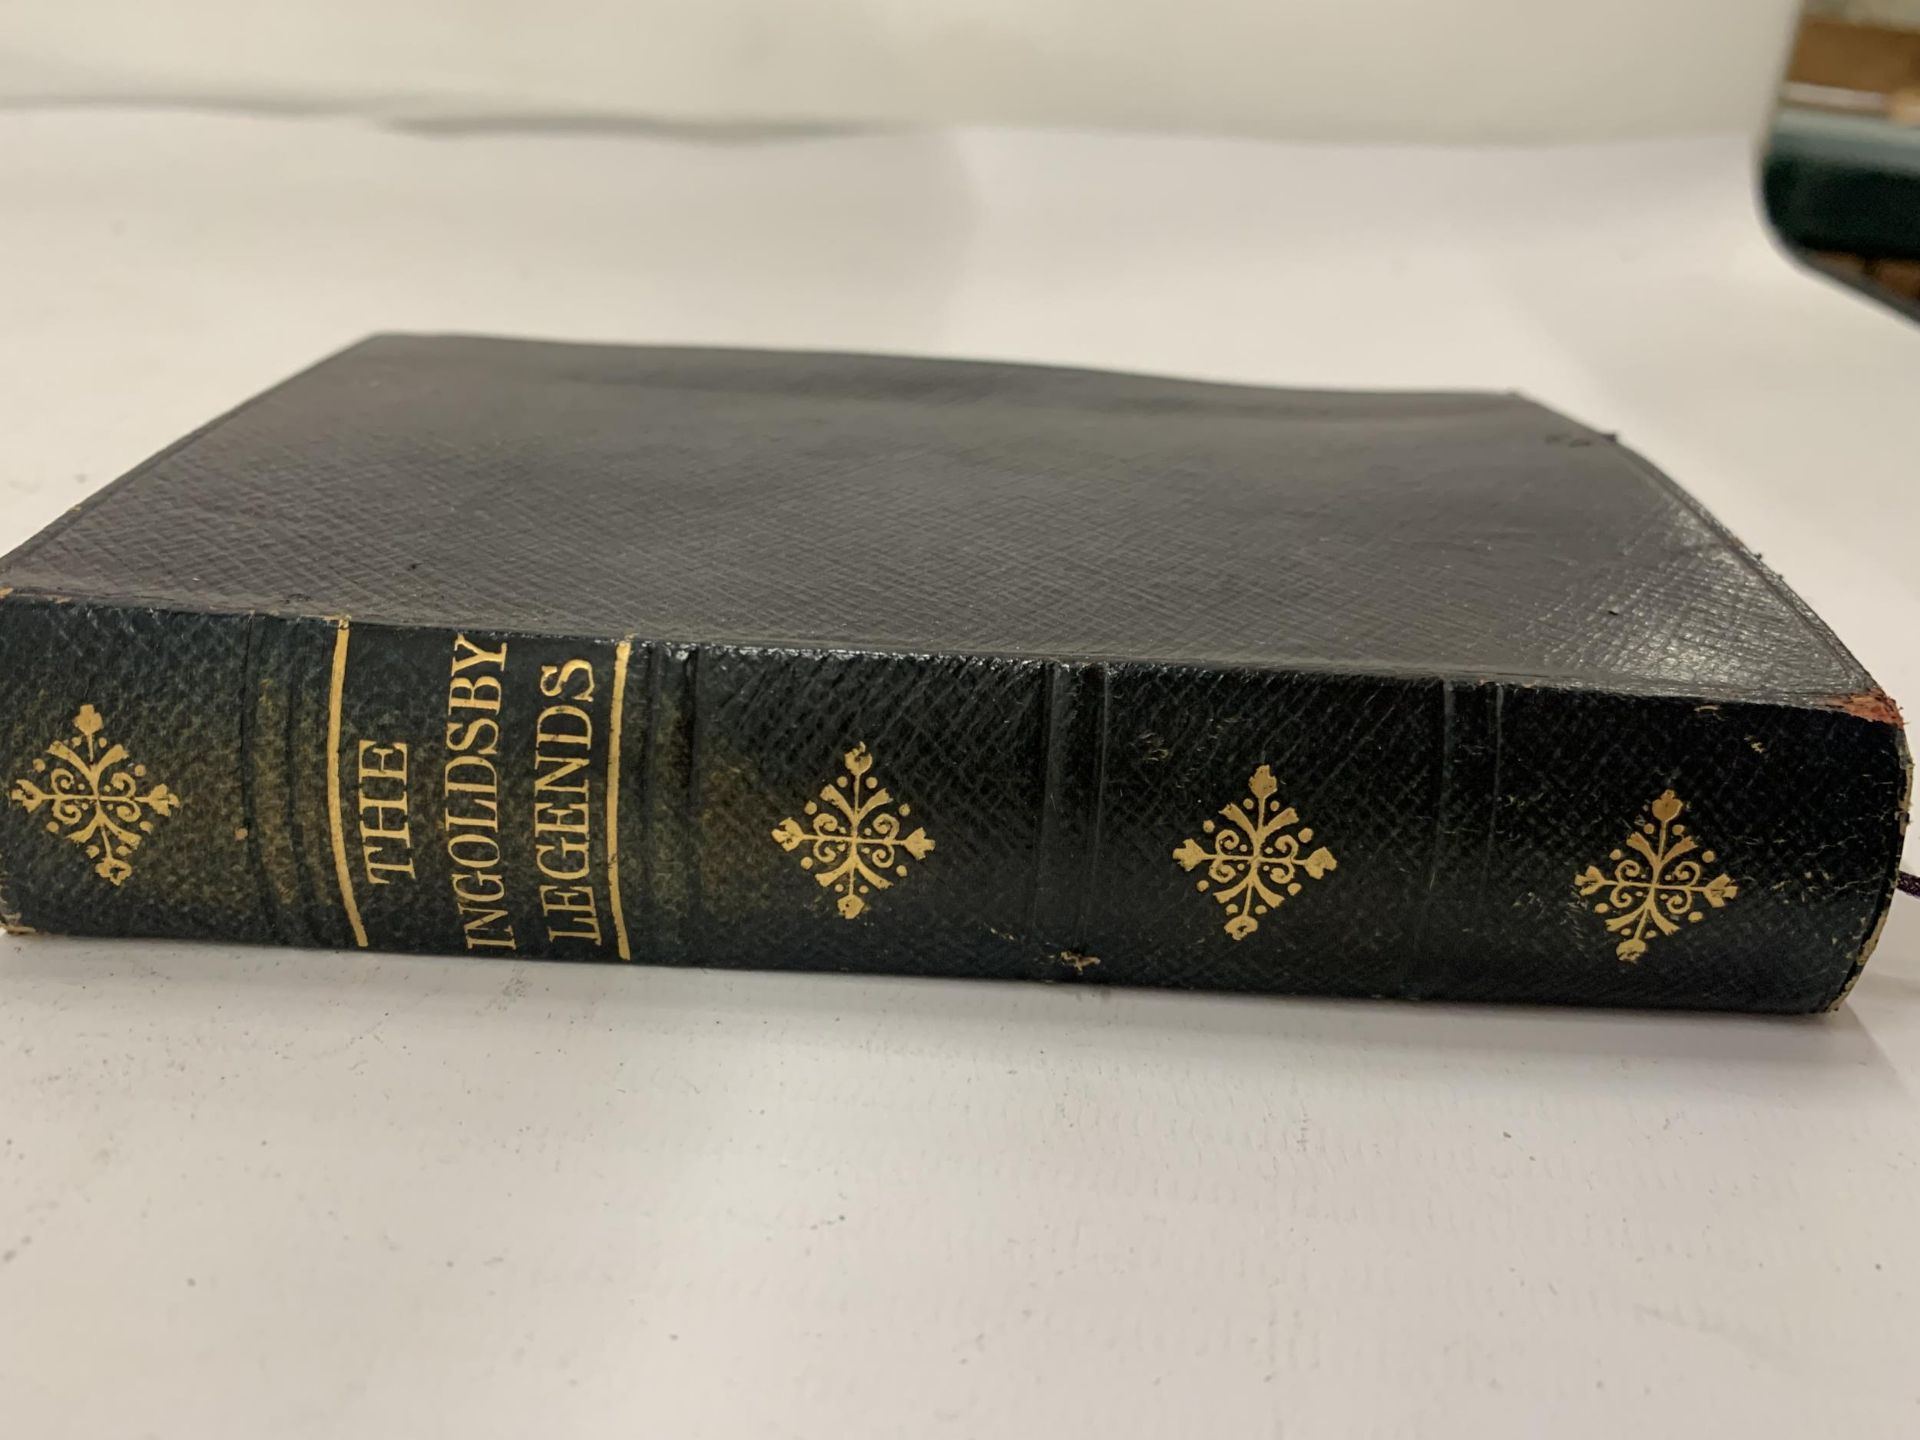 AN ANTIQUE BOOK PRINTED IN 1909 'THE INGOLDSBY LEGENDS' BY REV. R. H. BARHAM FROM A COLLECTION OWNED